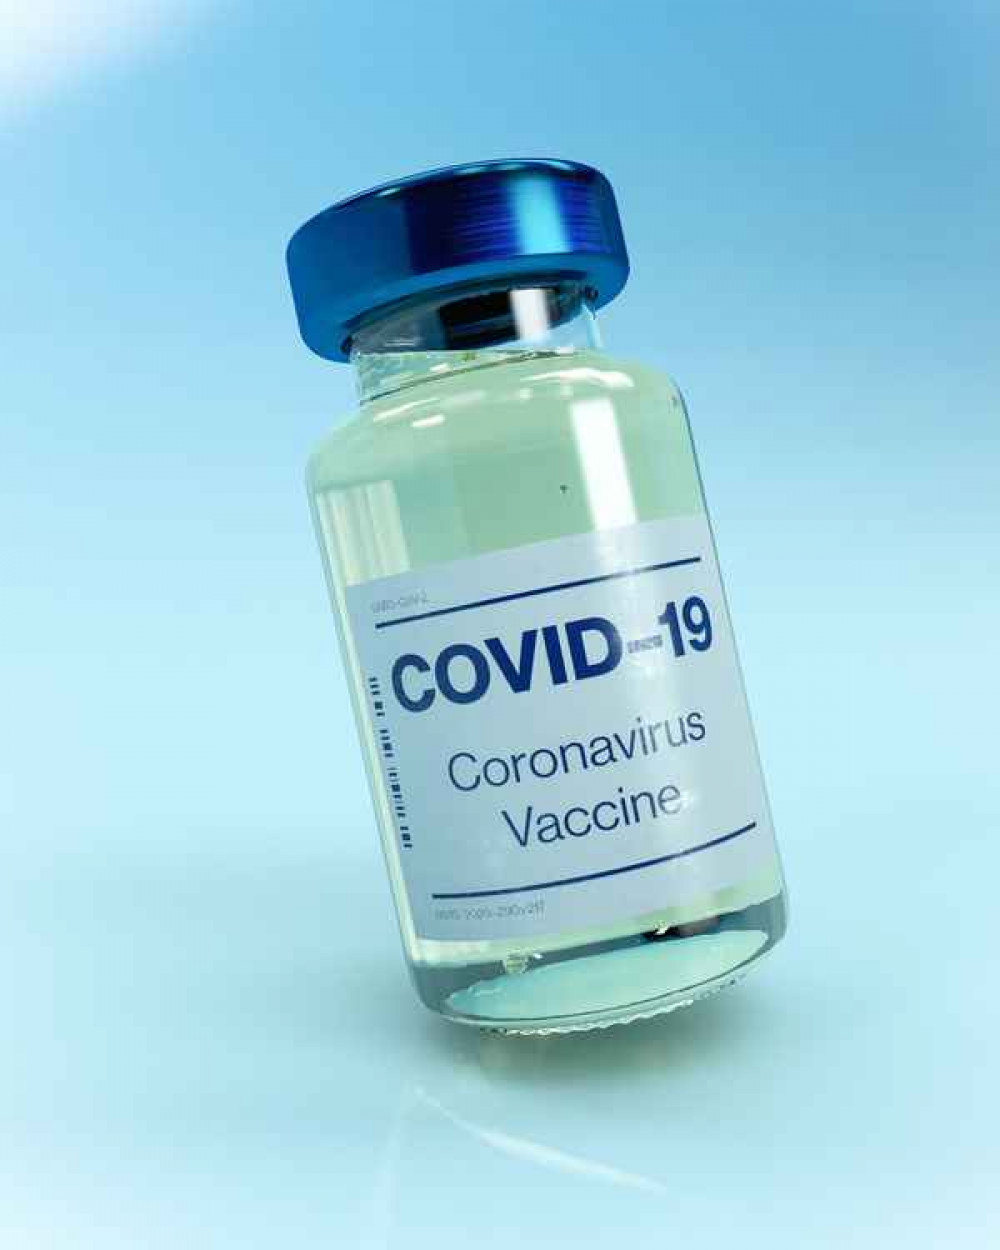 Hitchin: People aged 45 and over now invited to book Covid vaccine jab. CREDIT: Unsplash